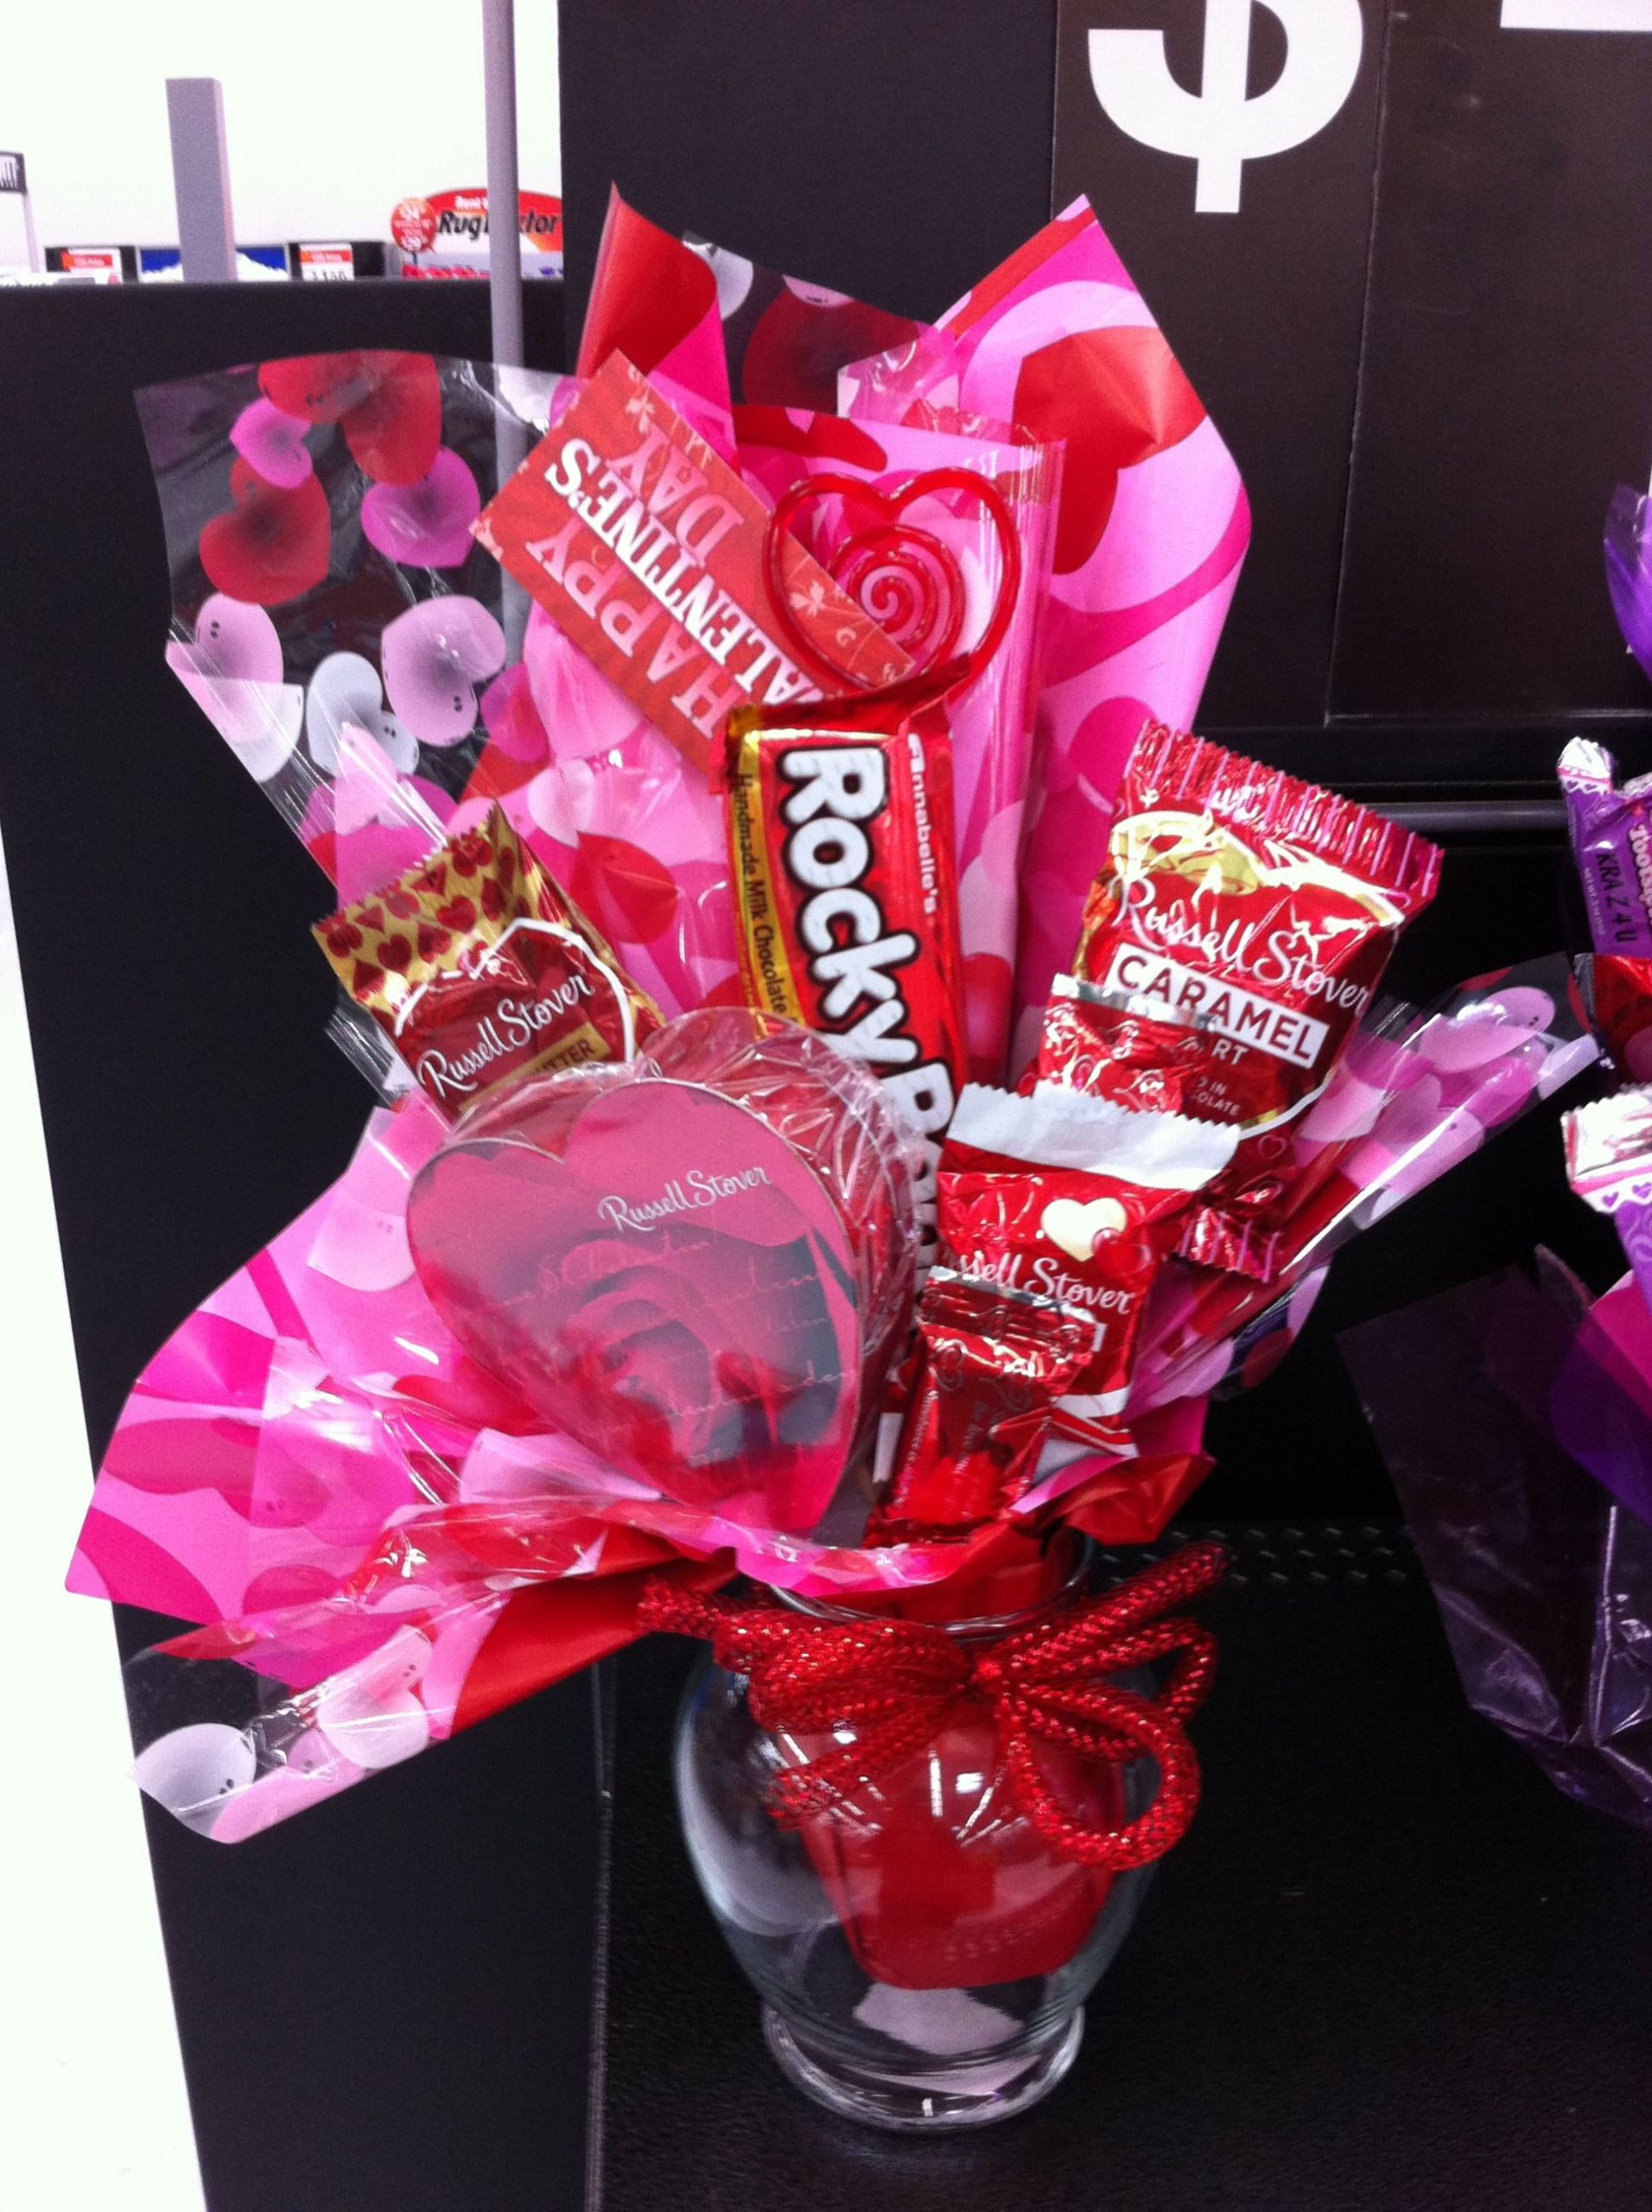 Valentines Candy Gift Ideas
 Candy bouquet